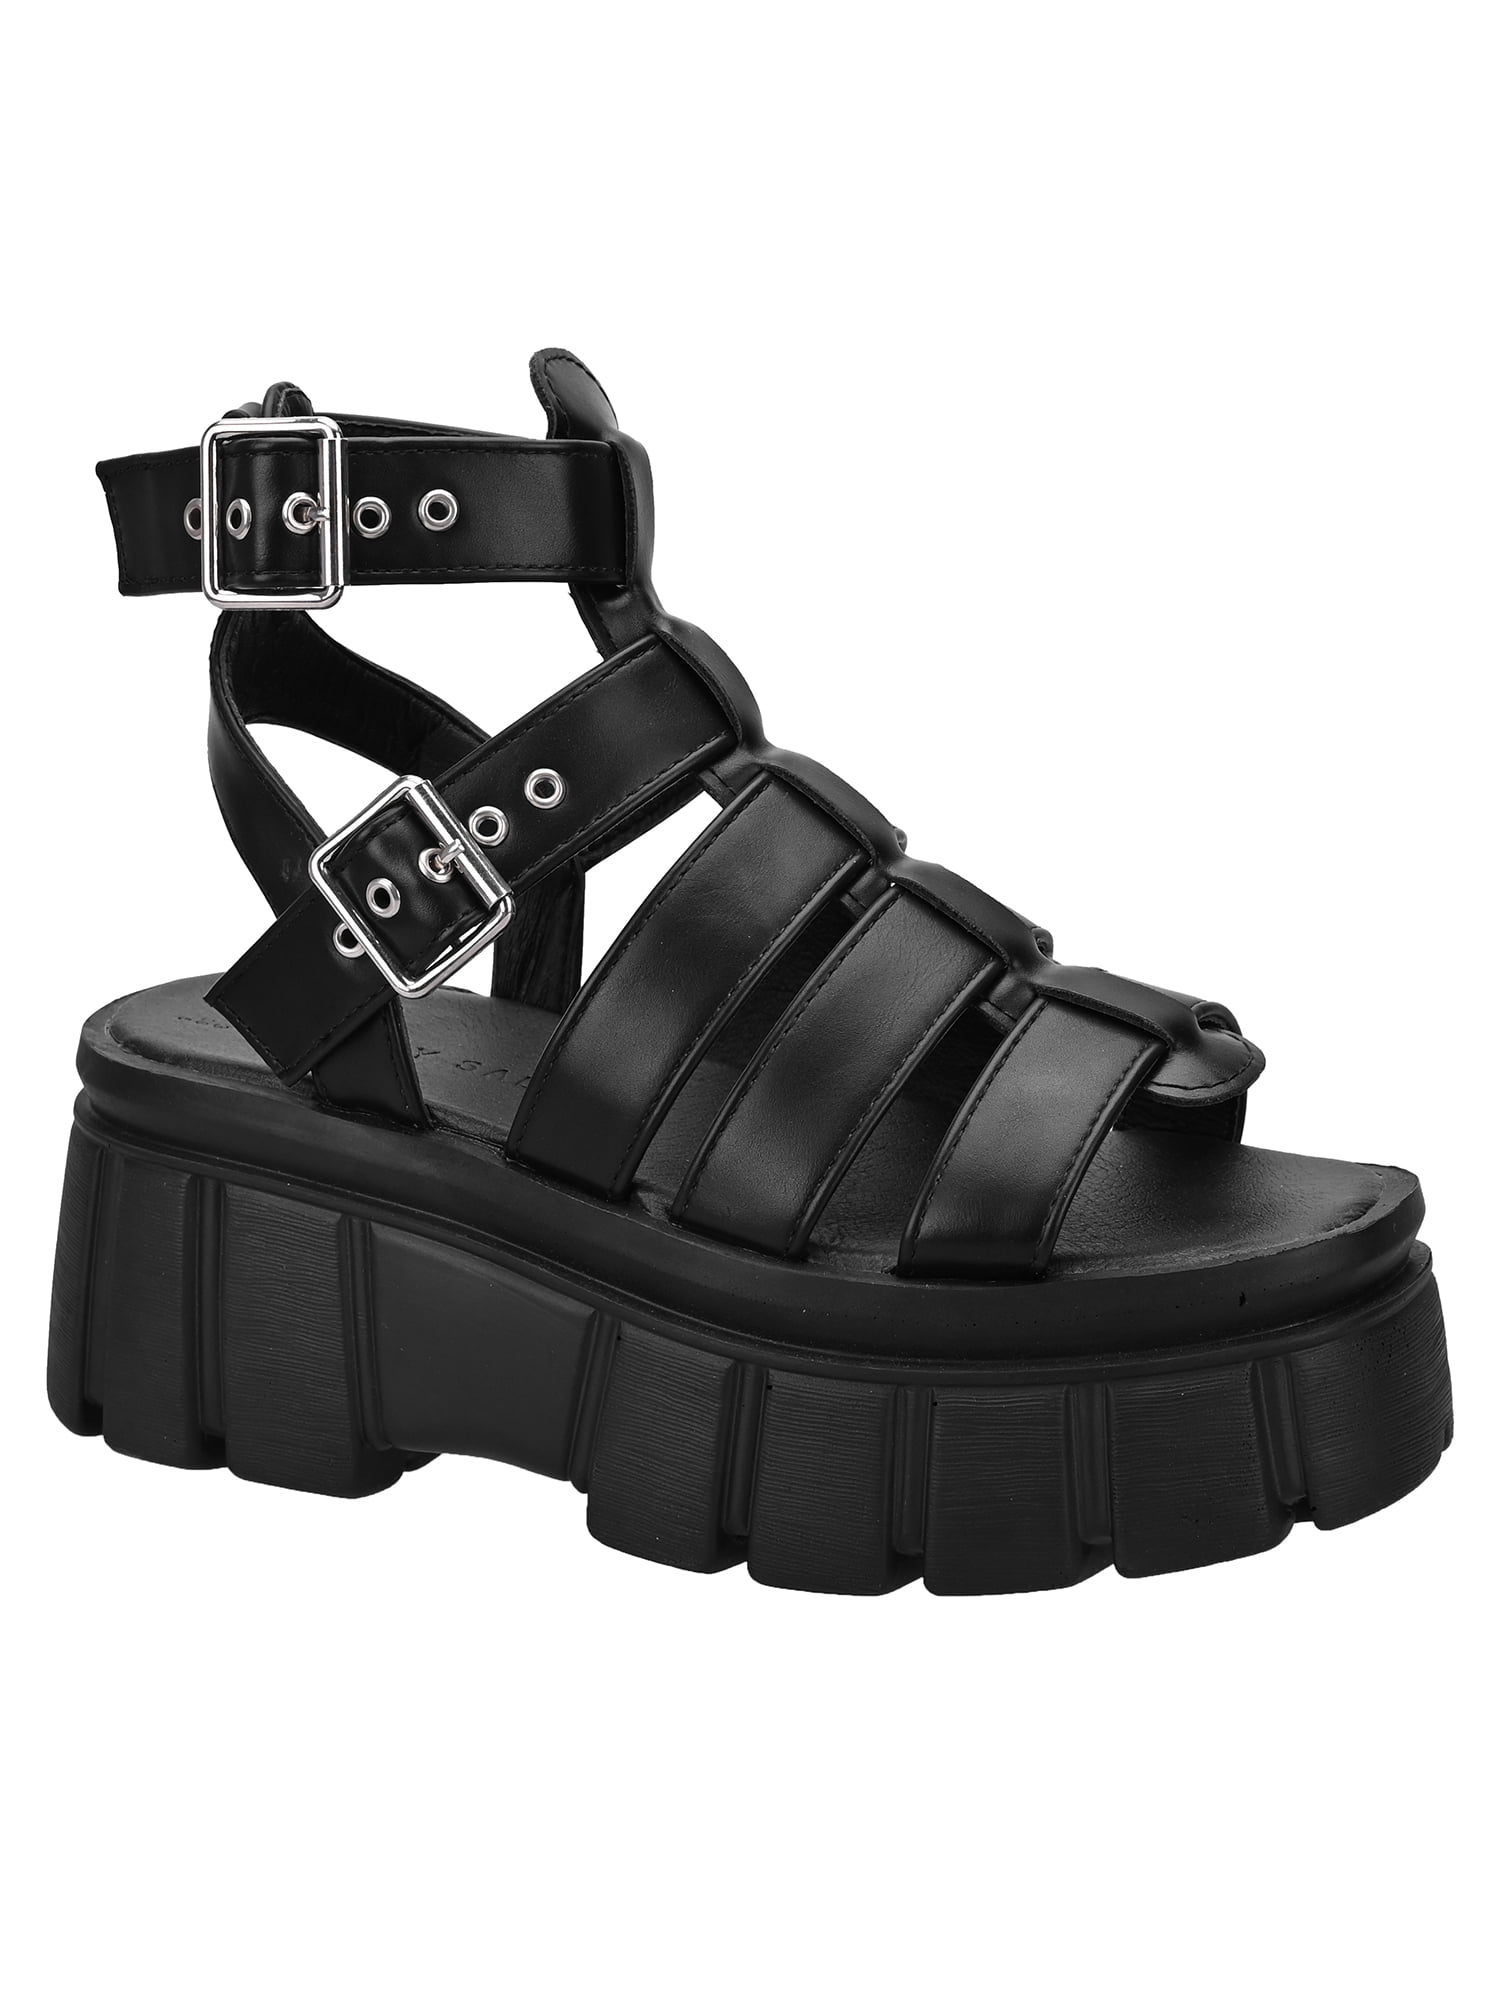 READYSALTED Women's Chunky Goth Platform Sandals Buckle Ankle Strap ...